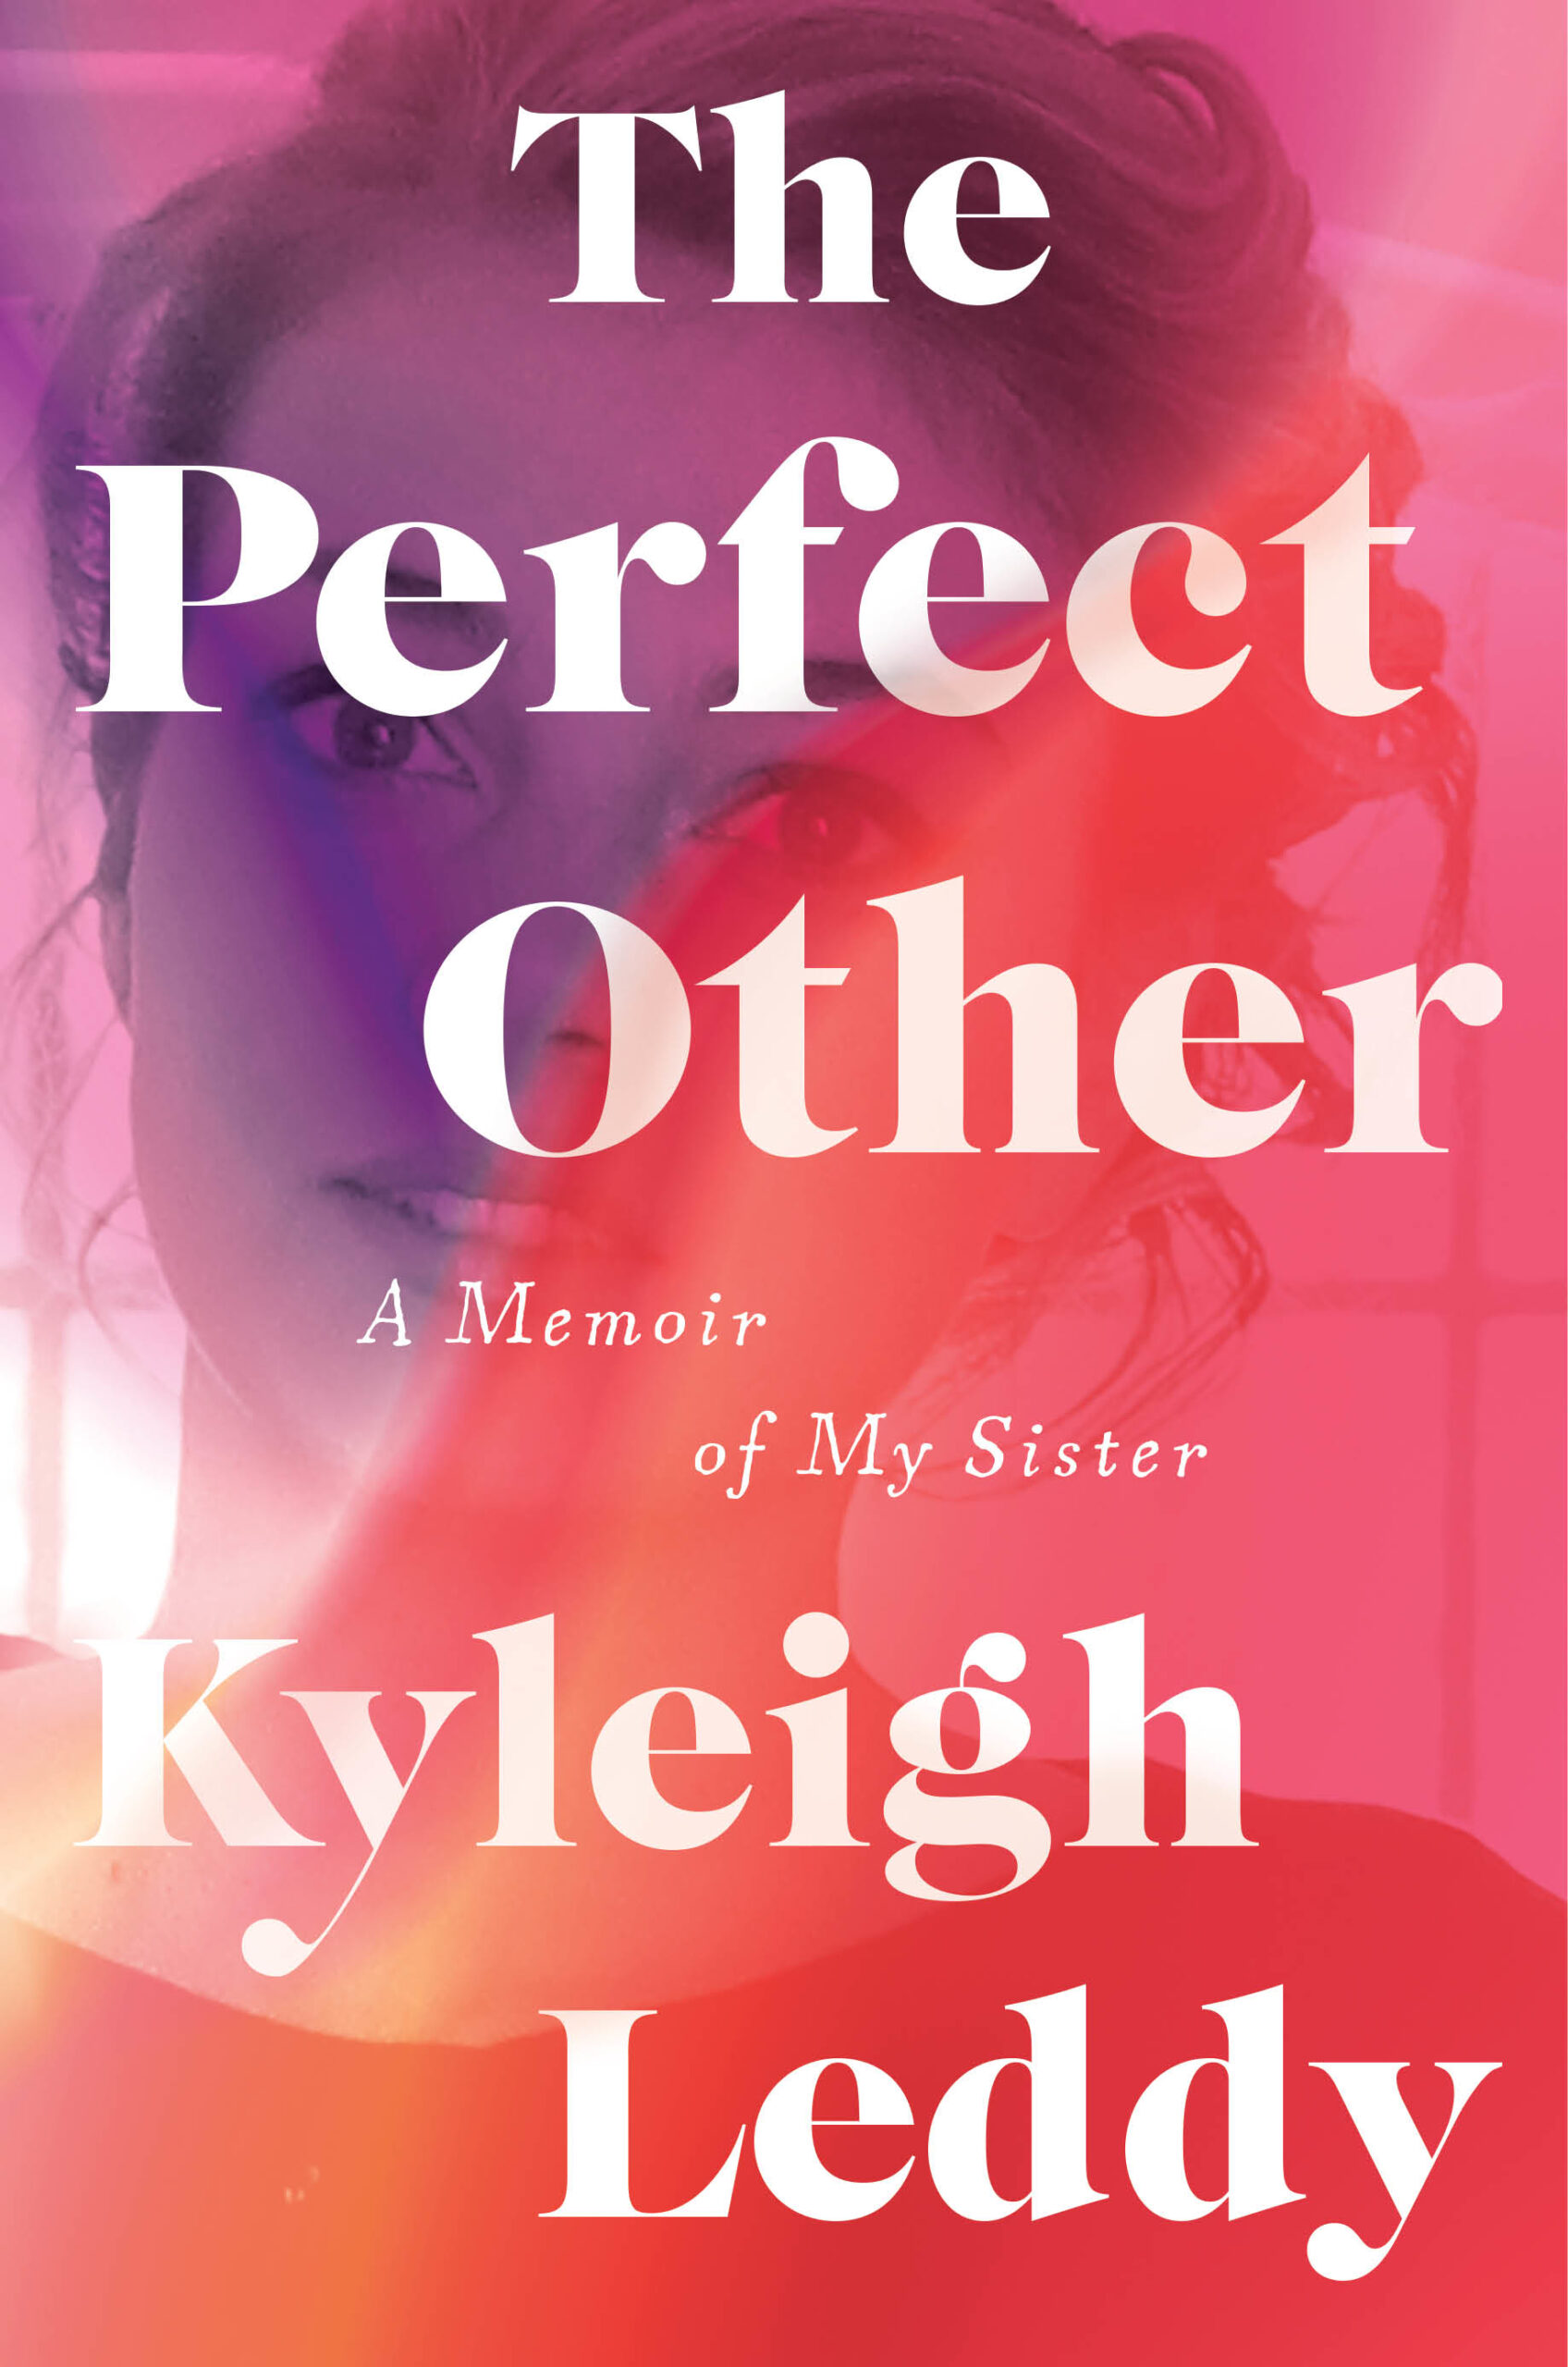 Book Launch: The Perfect Other by Kyleigh Leddy in conversation with Katherine Tague